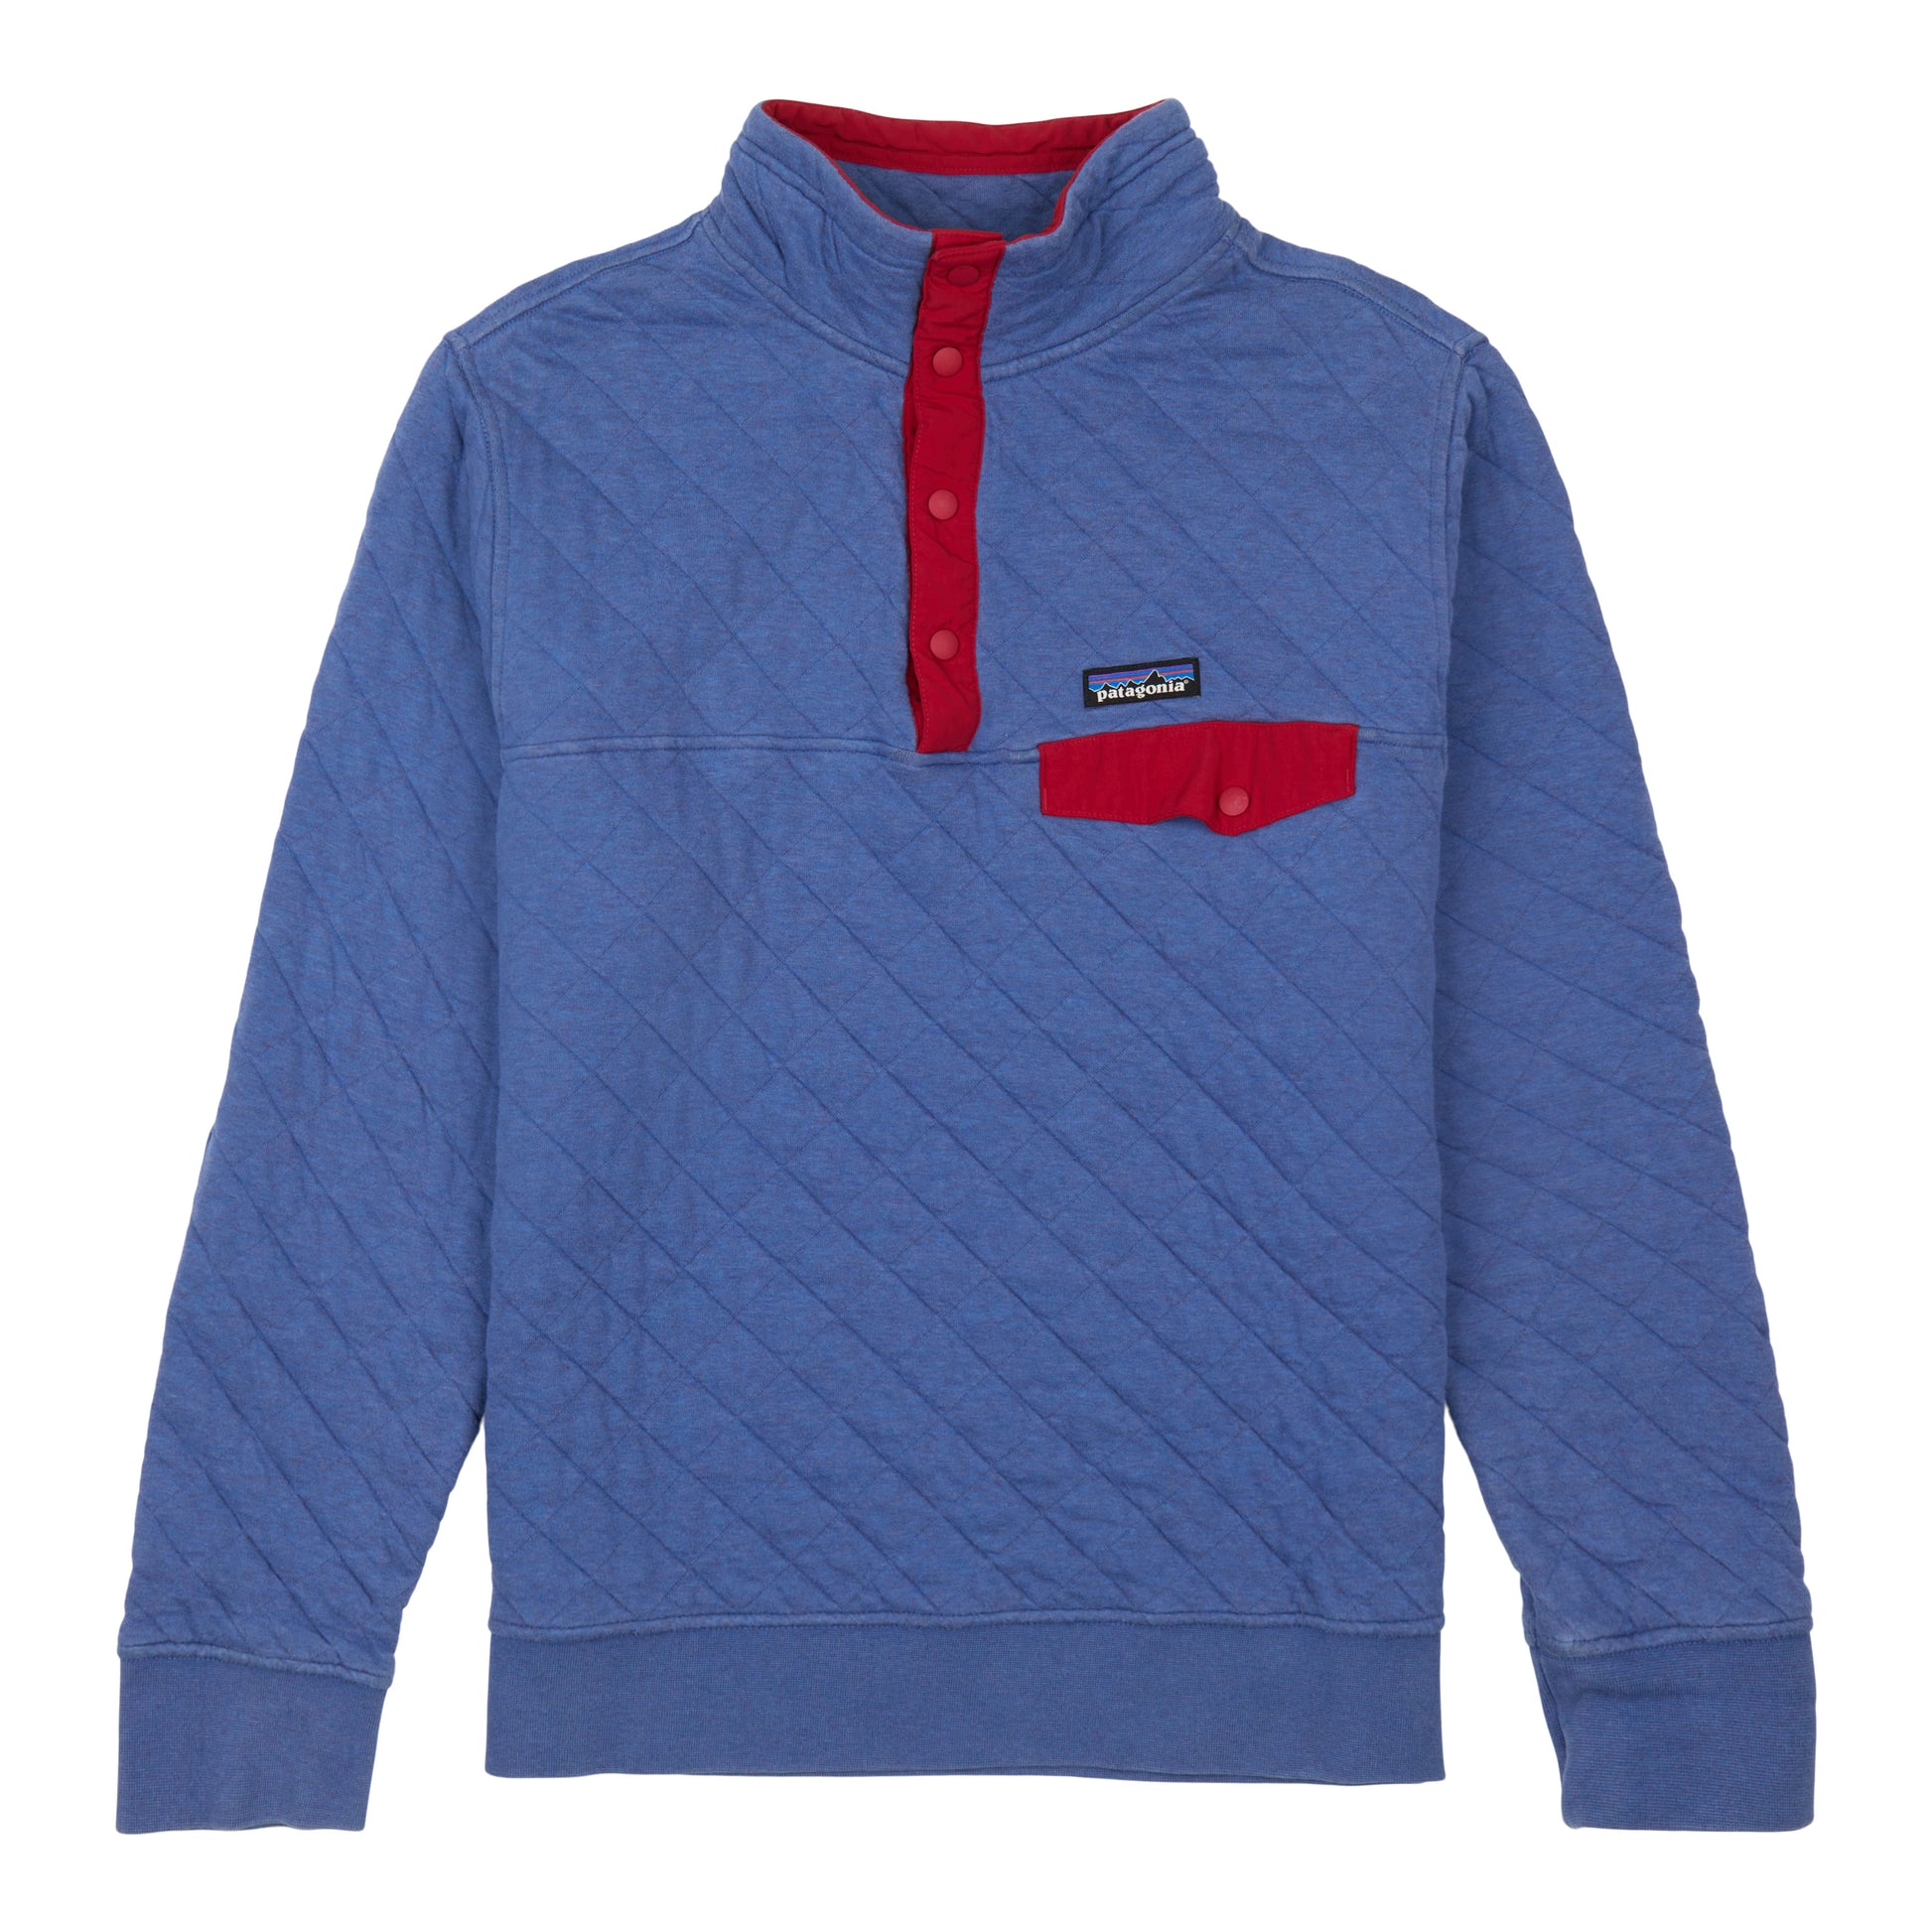 Review: the Patagonia Quilt Snap-T Pullover Got Me Hooked on the Brand